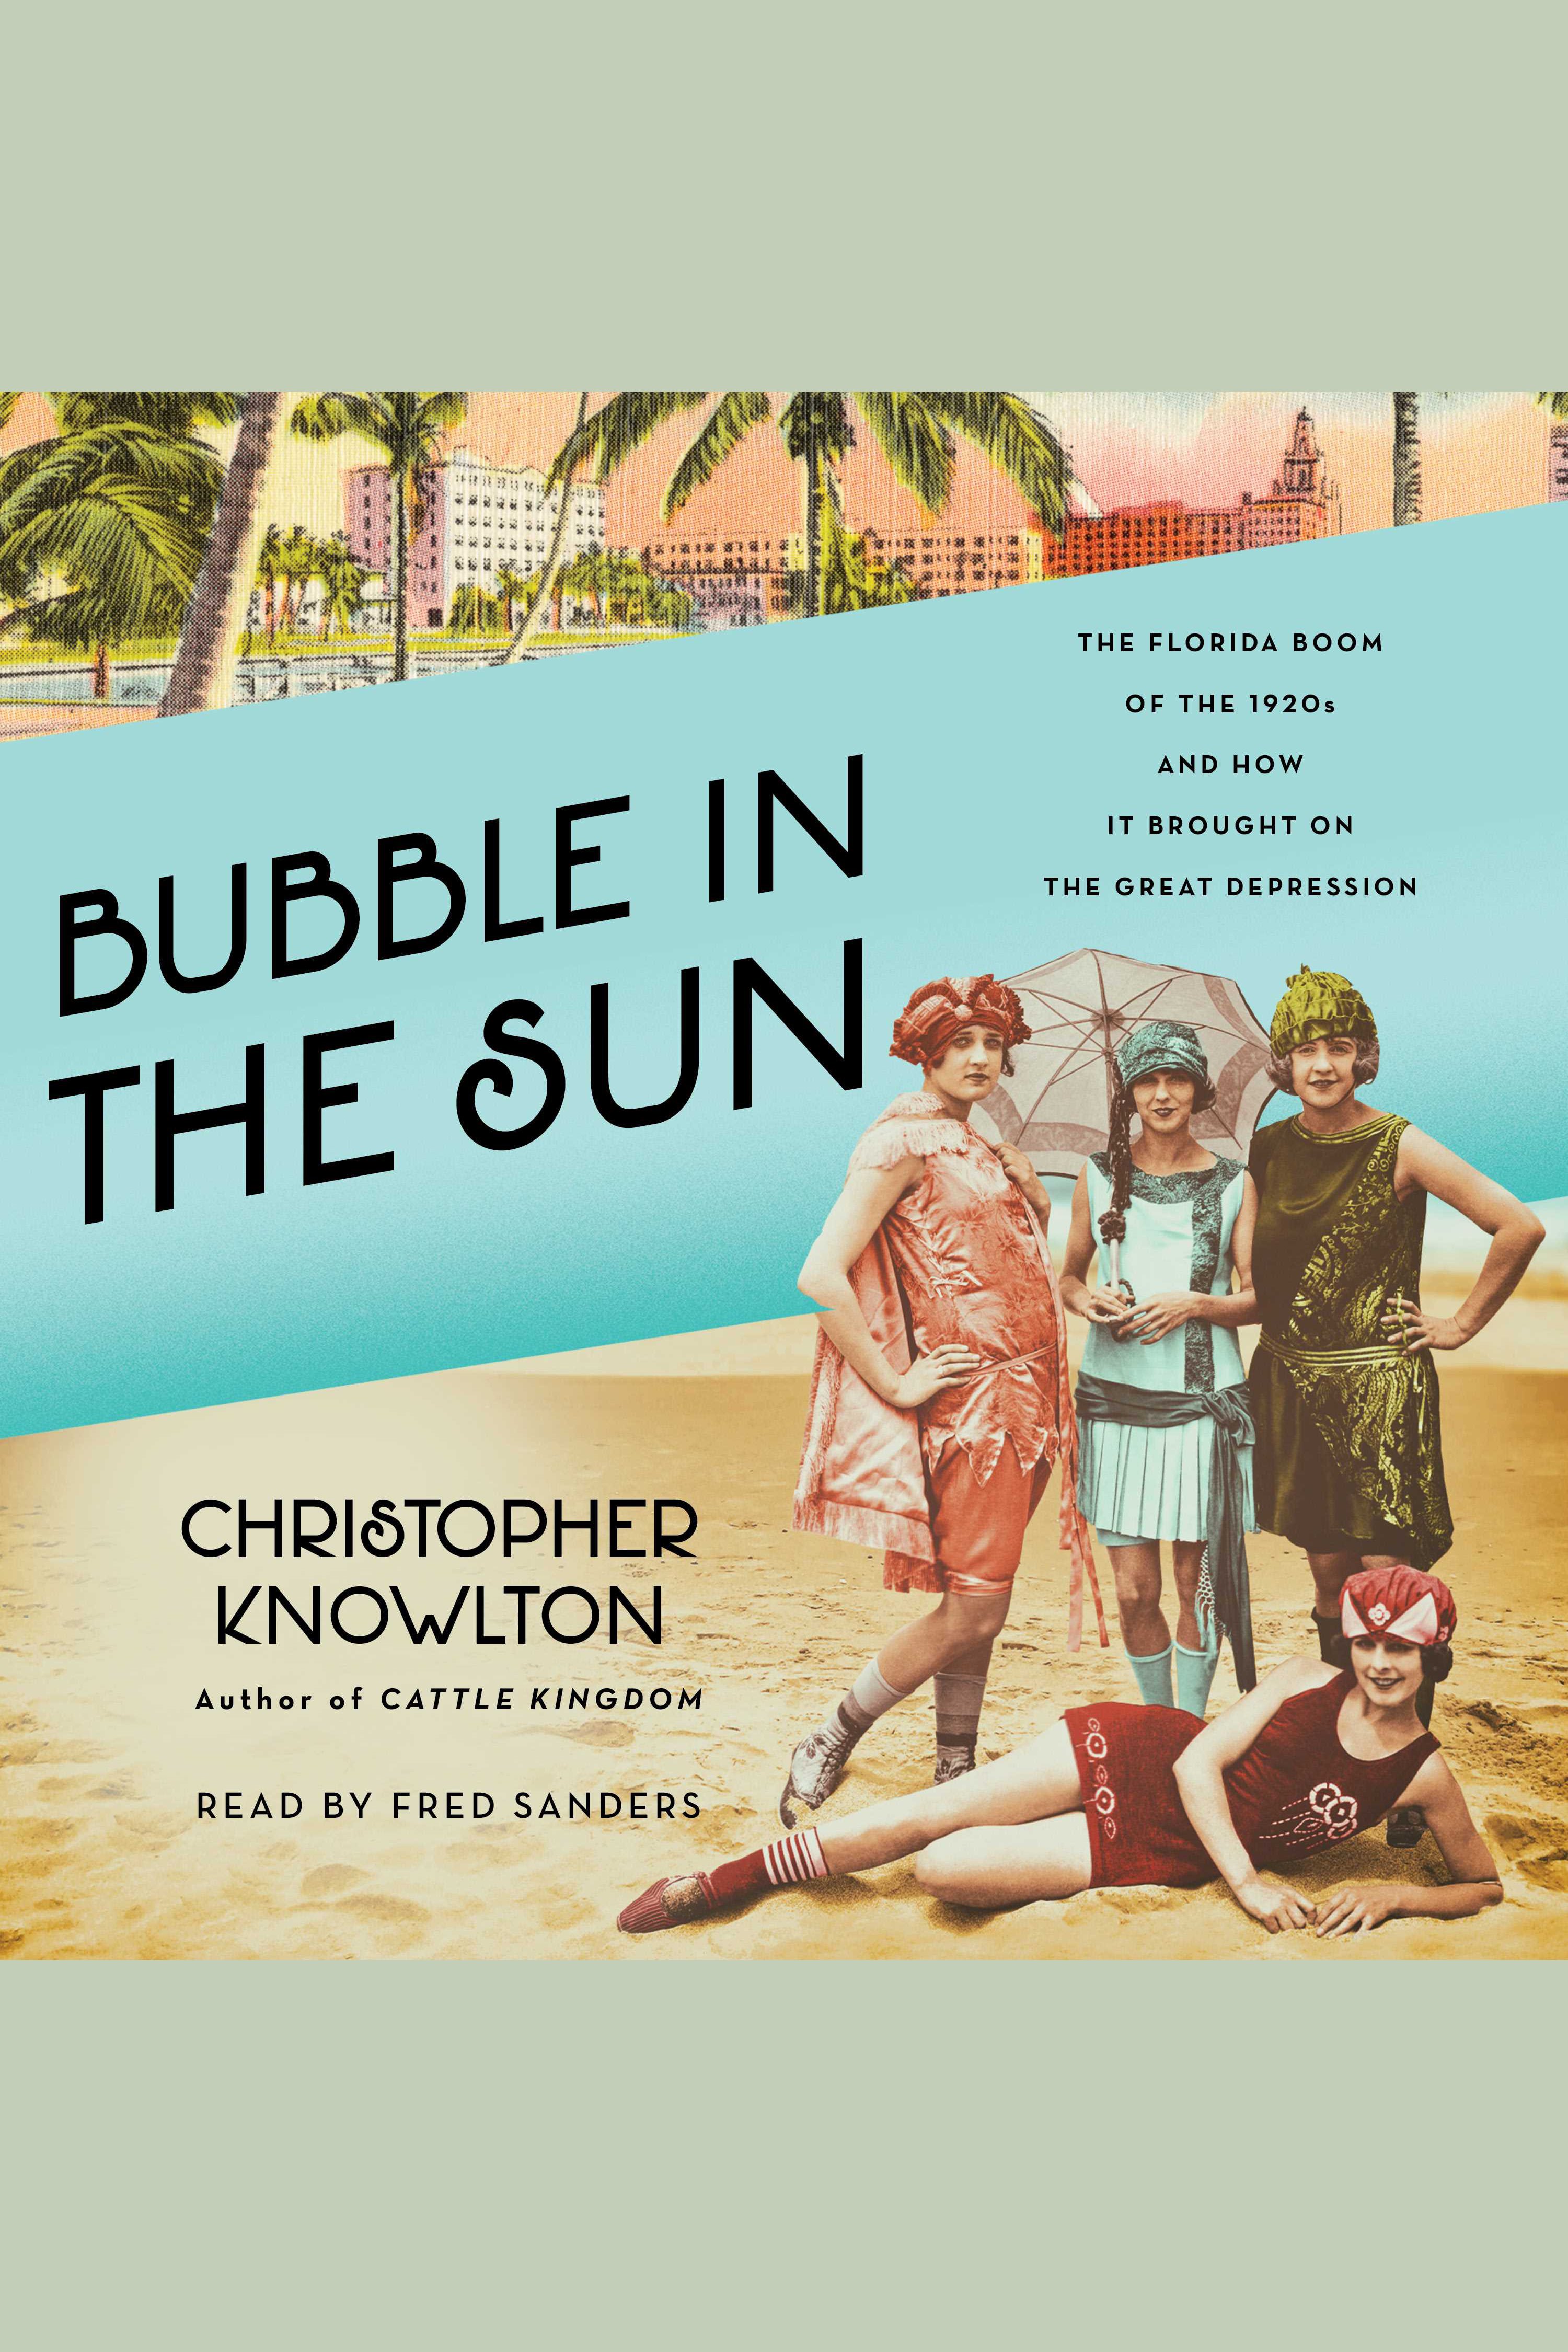 Umschlagbild für Bubble in the Sun [electronic resource] : The Florida Boom of the 1920s and How It Brought on the Great Depression